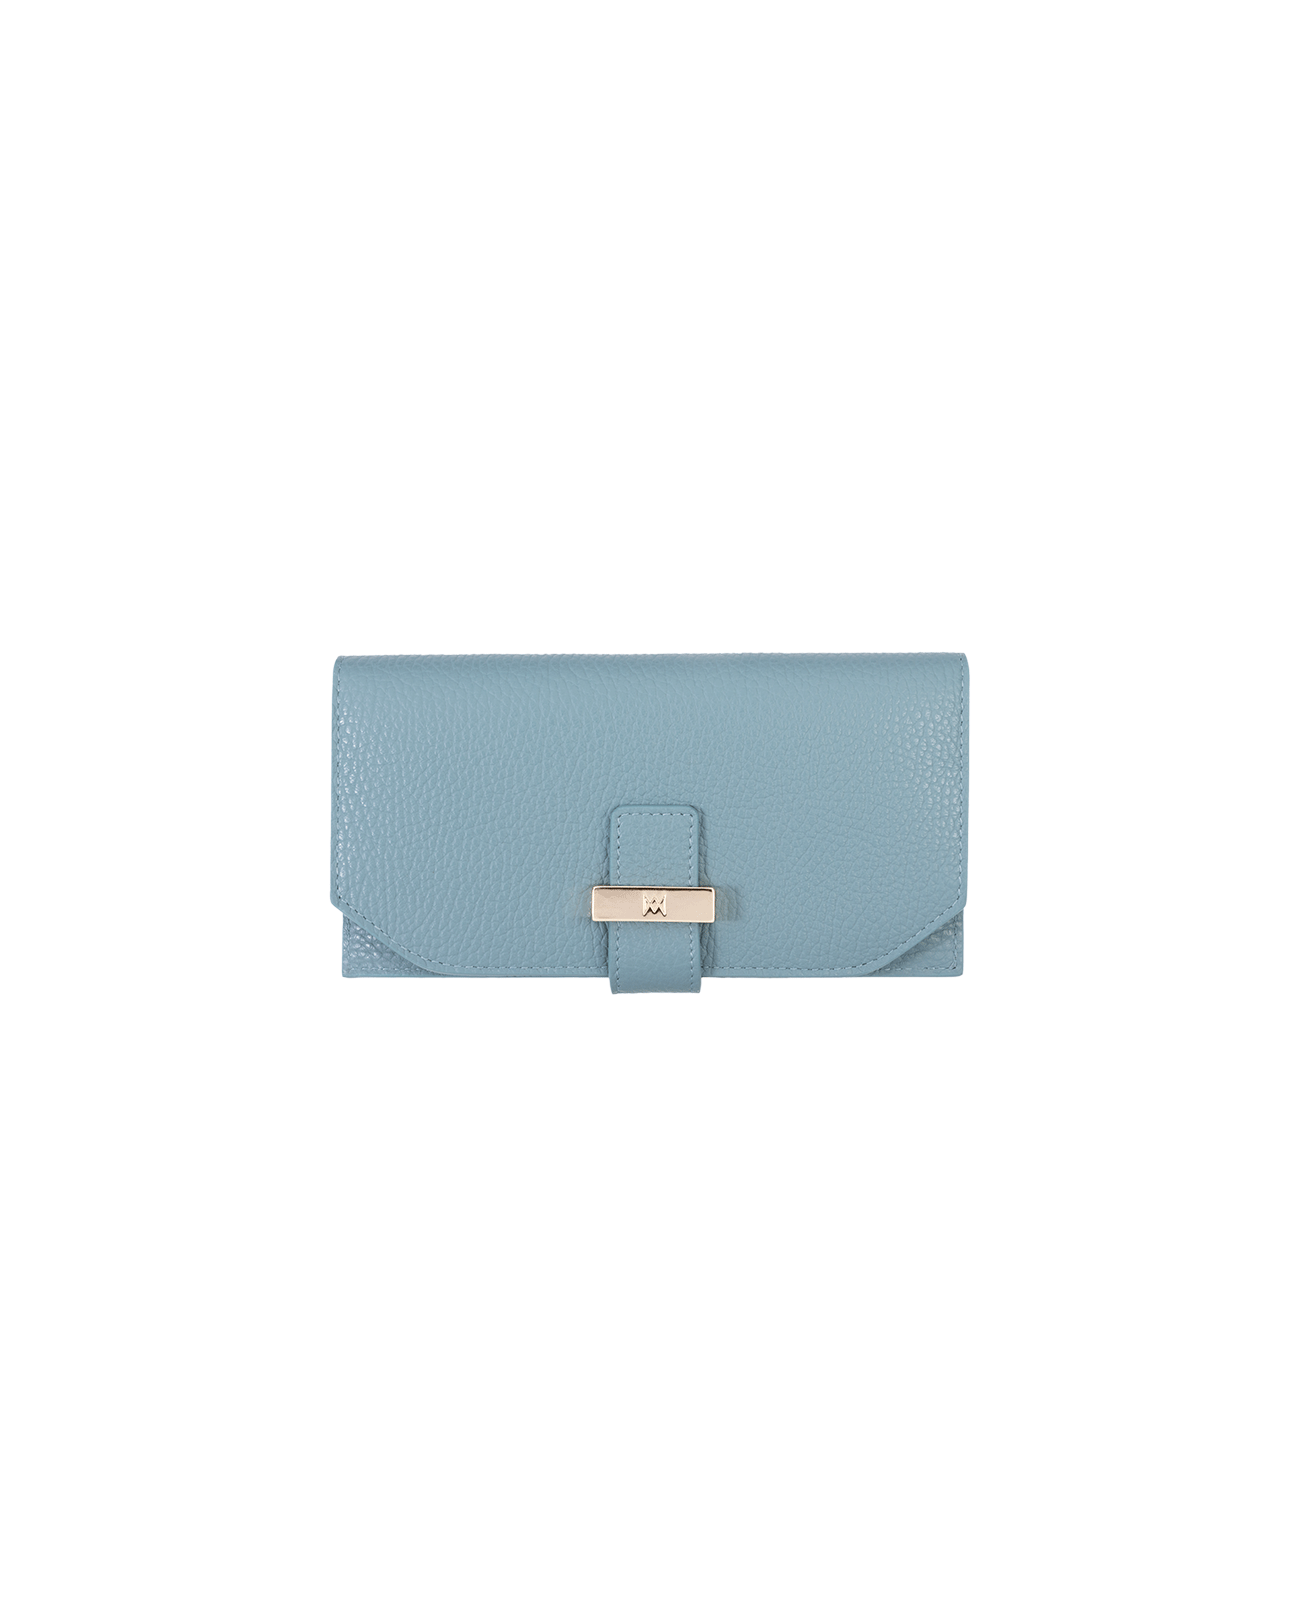 Wallet in Italian full-grain leather. Designed to carry your personal items. Available in a variety of styles and designs. Color: Avio. Size: Medium